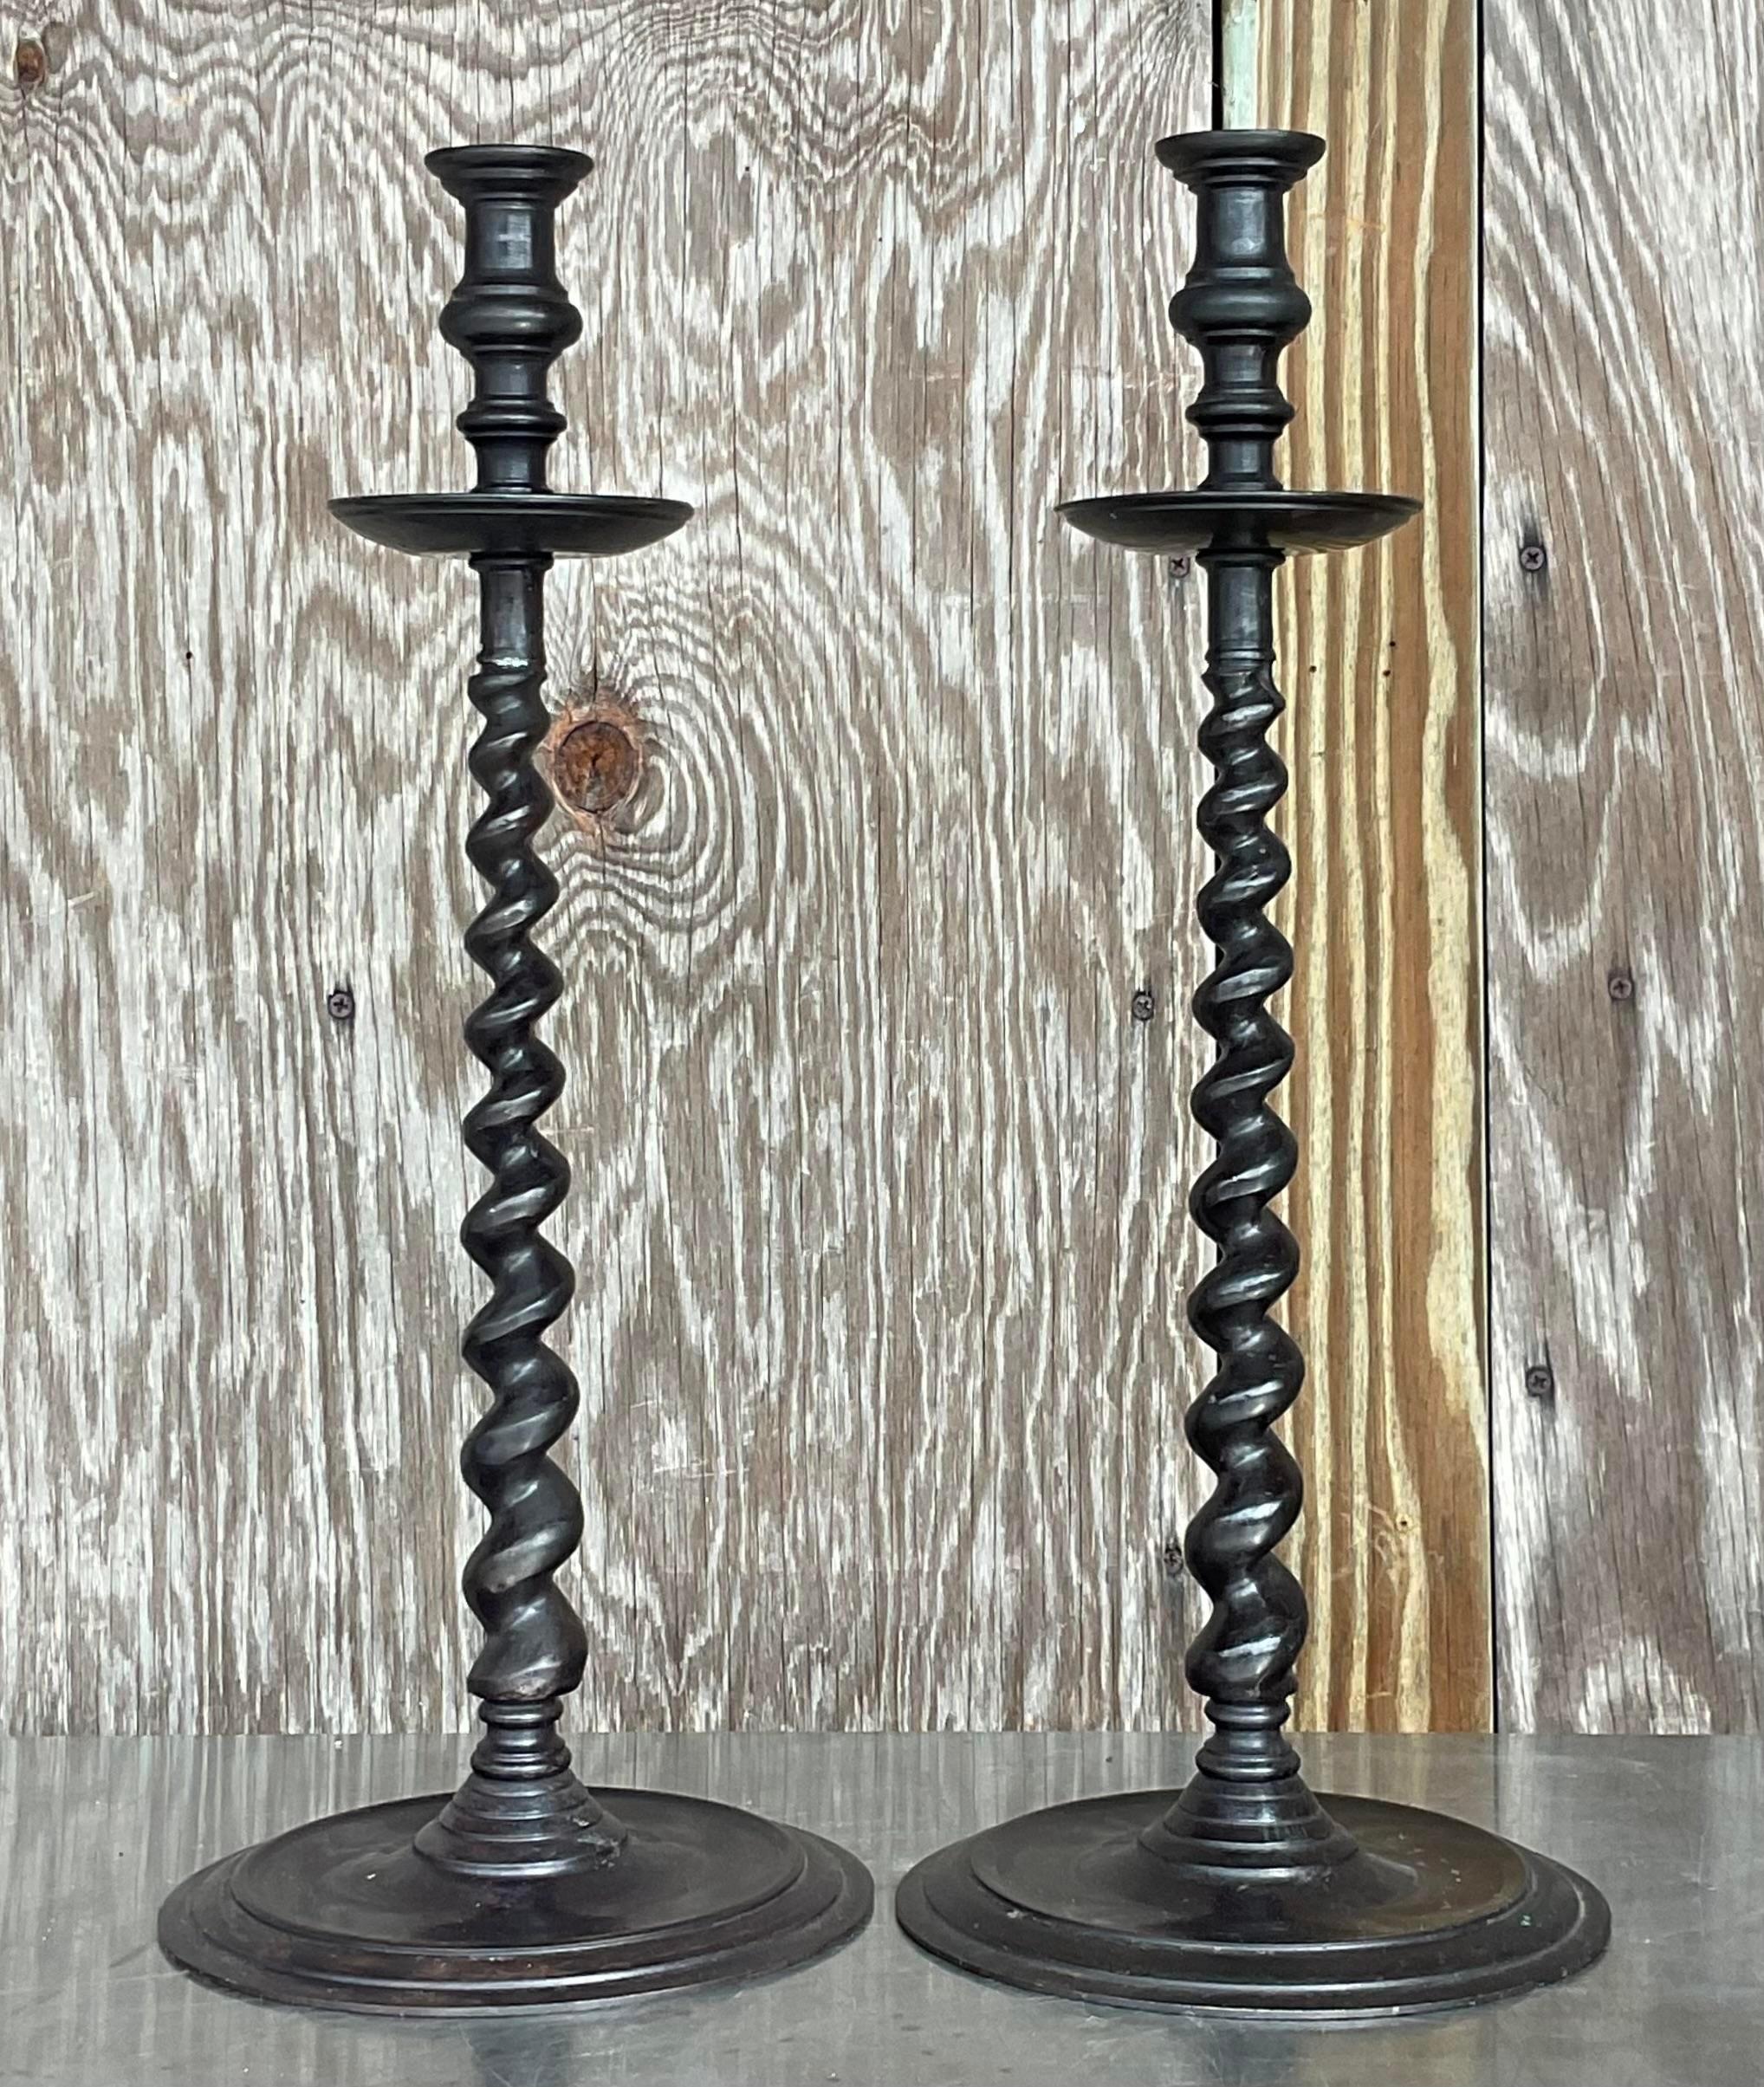 A fabulous pair of vintage Boho candlesticks. A chic barley twist design with a patinated bronze finish. Made by the iconic Maitland Smith group and tagged on the bottom. Acquired from a Palm Beach estate. 